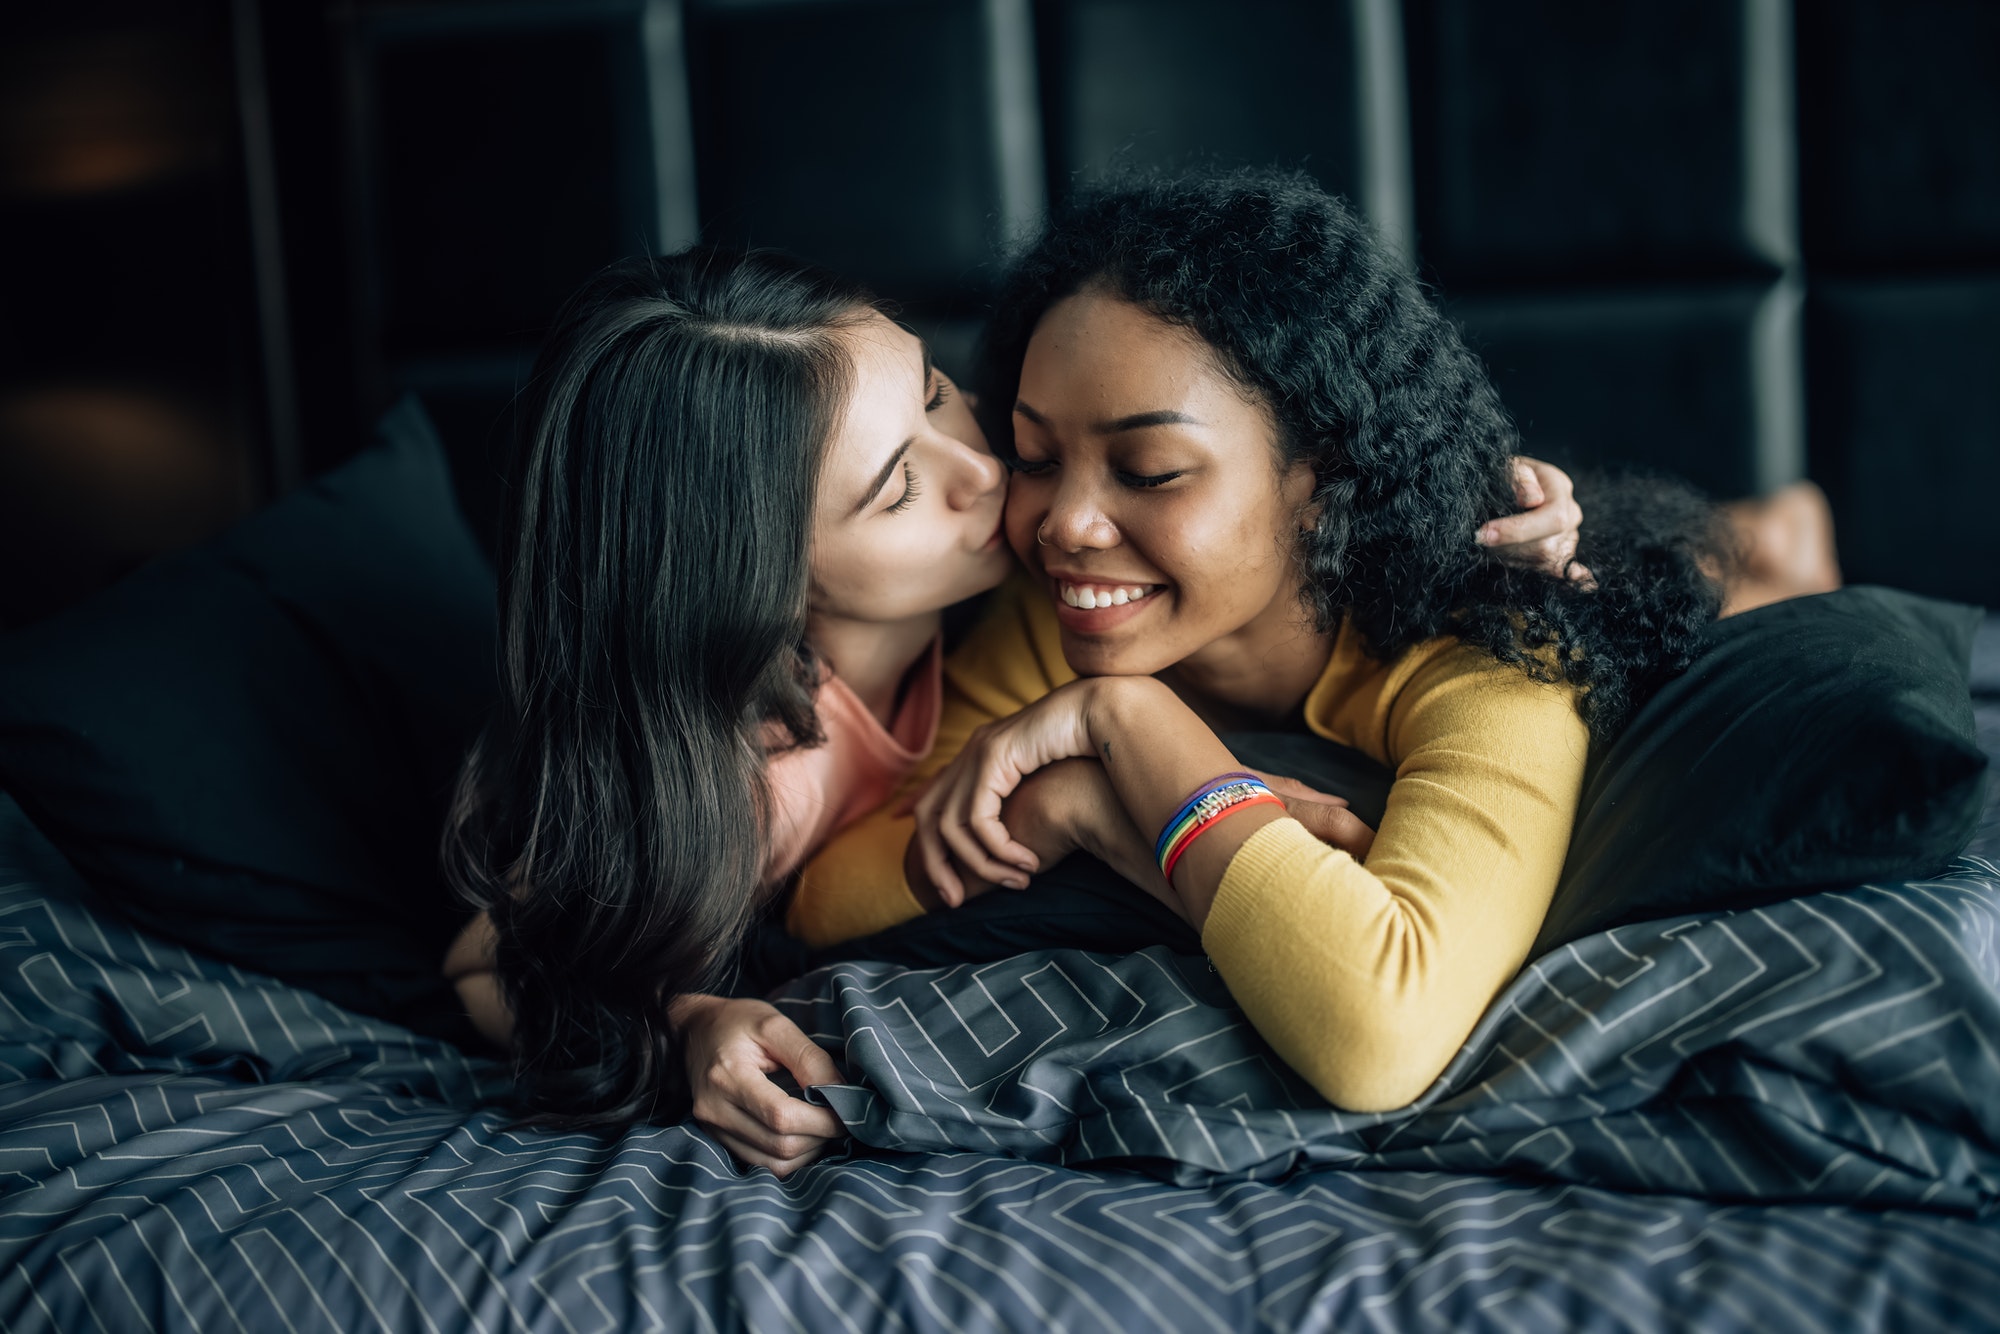 Lesbian partners share joy, play on bed, embrace, exchange tender kiss, radiating genuine happiness